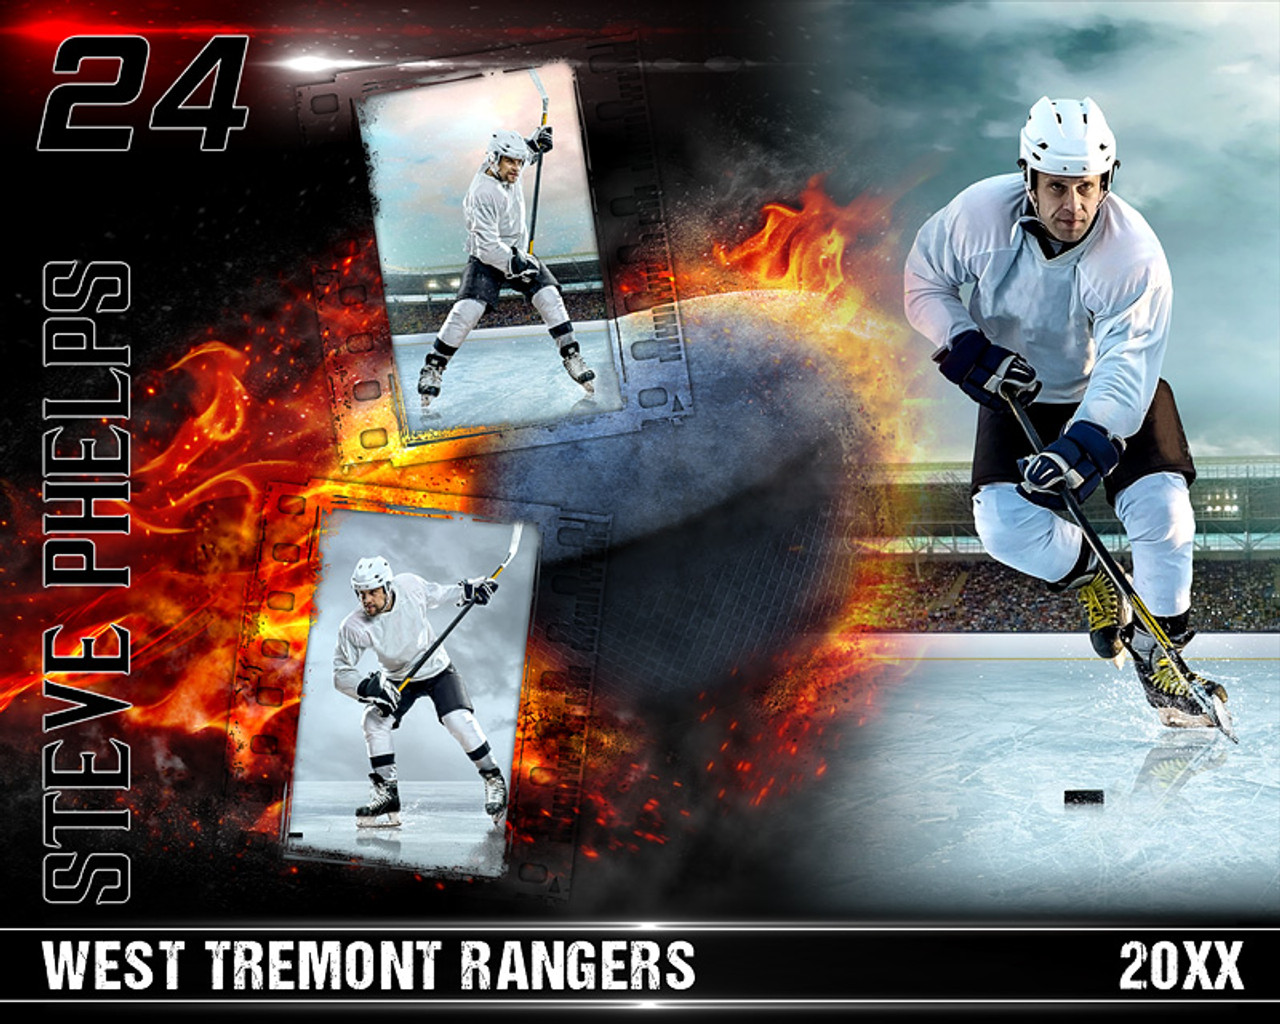 HOCKEY PHOTO COLLAGE - ON FIRE